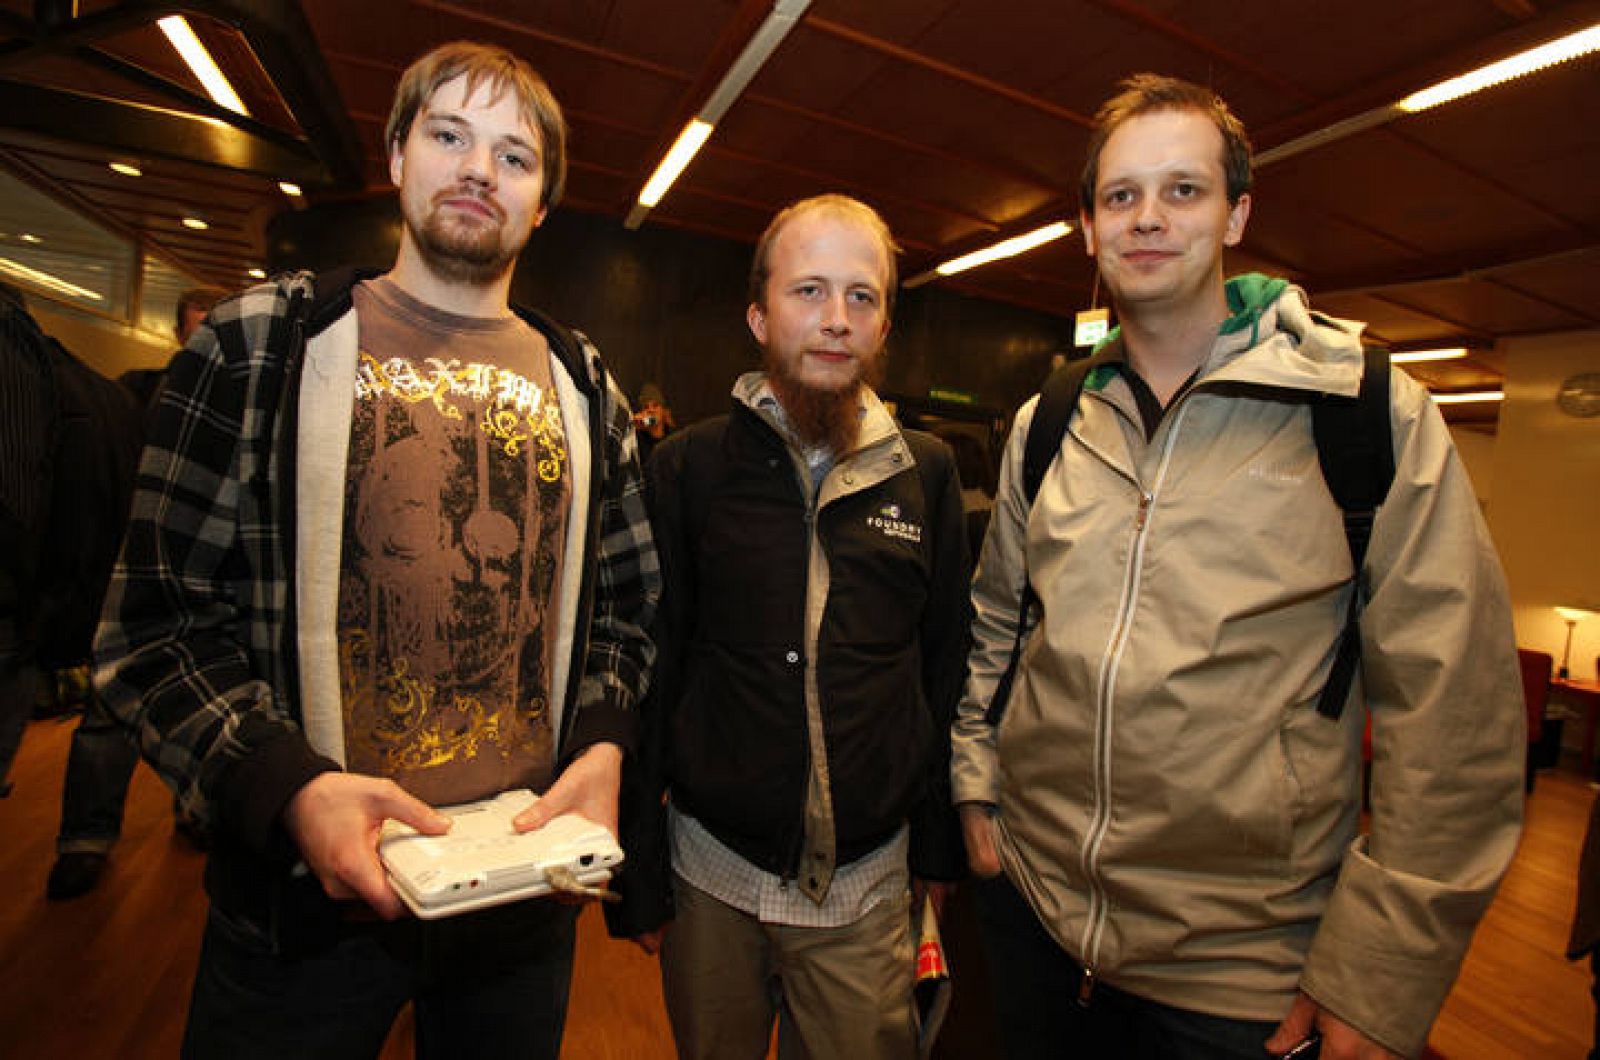 Pirate Bay co-founders Neij, Svartholm and Sunde leave the city court after the last day of argument's in their copyright trial in Stockholm